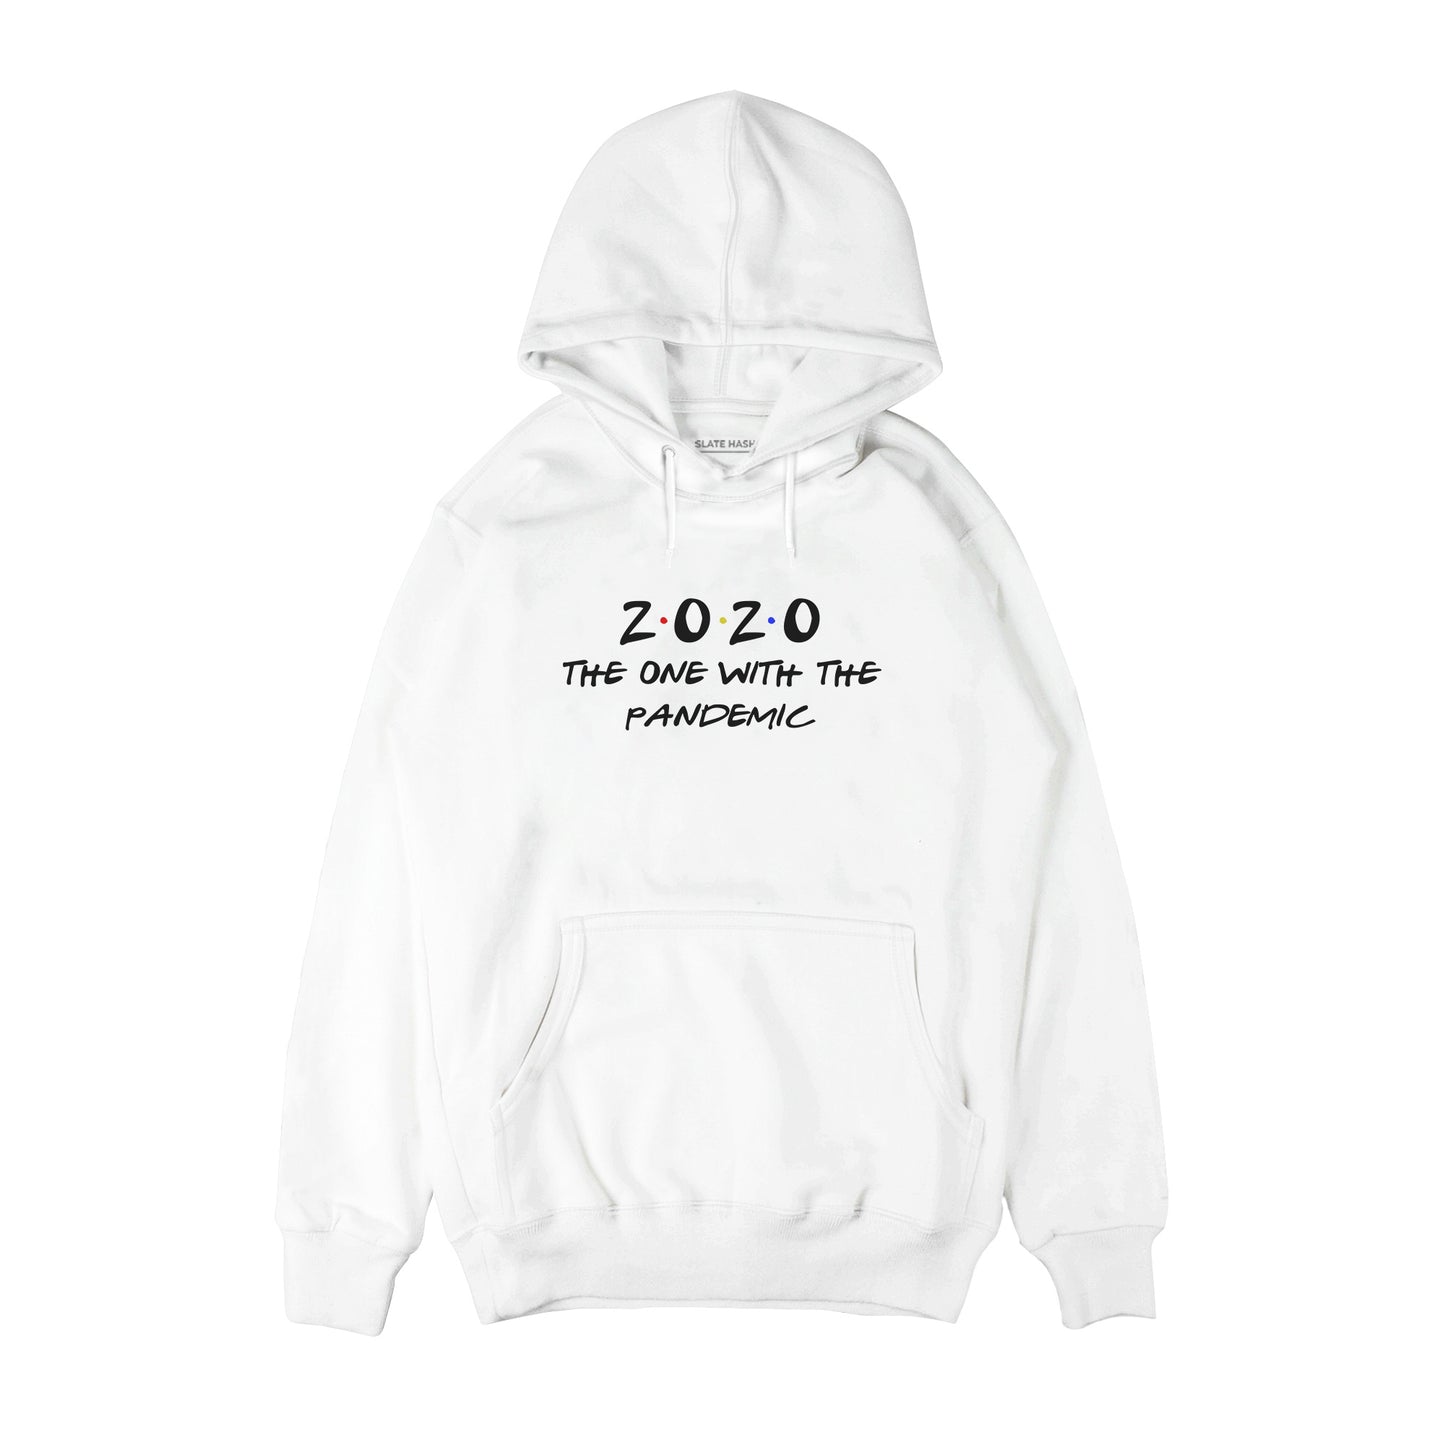 2020 The One with the Pandemic Hoodie